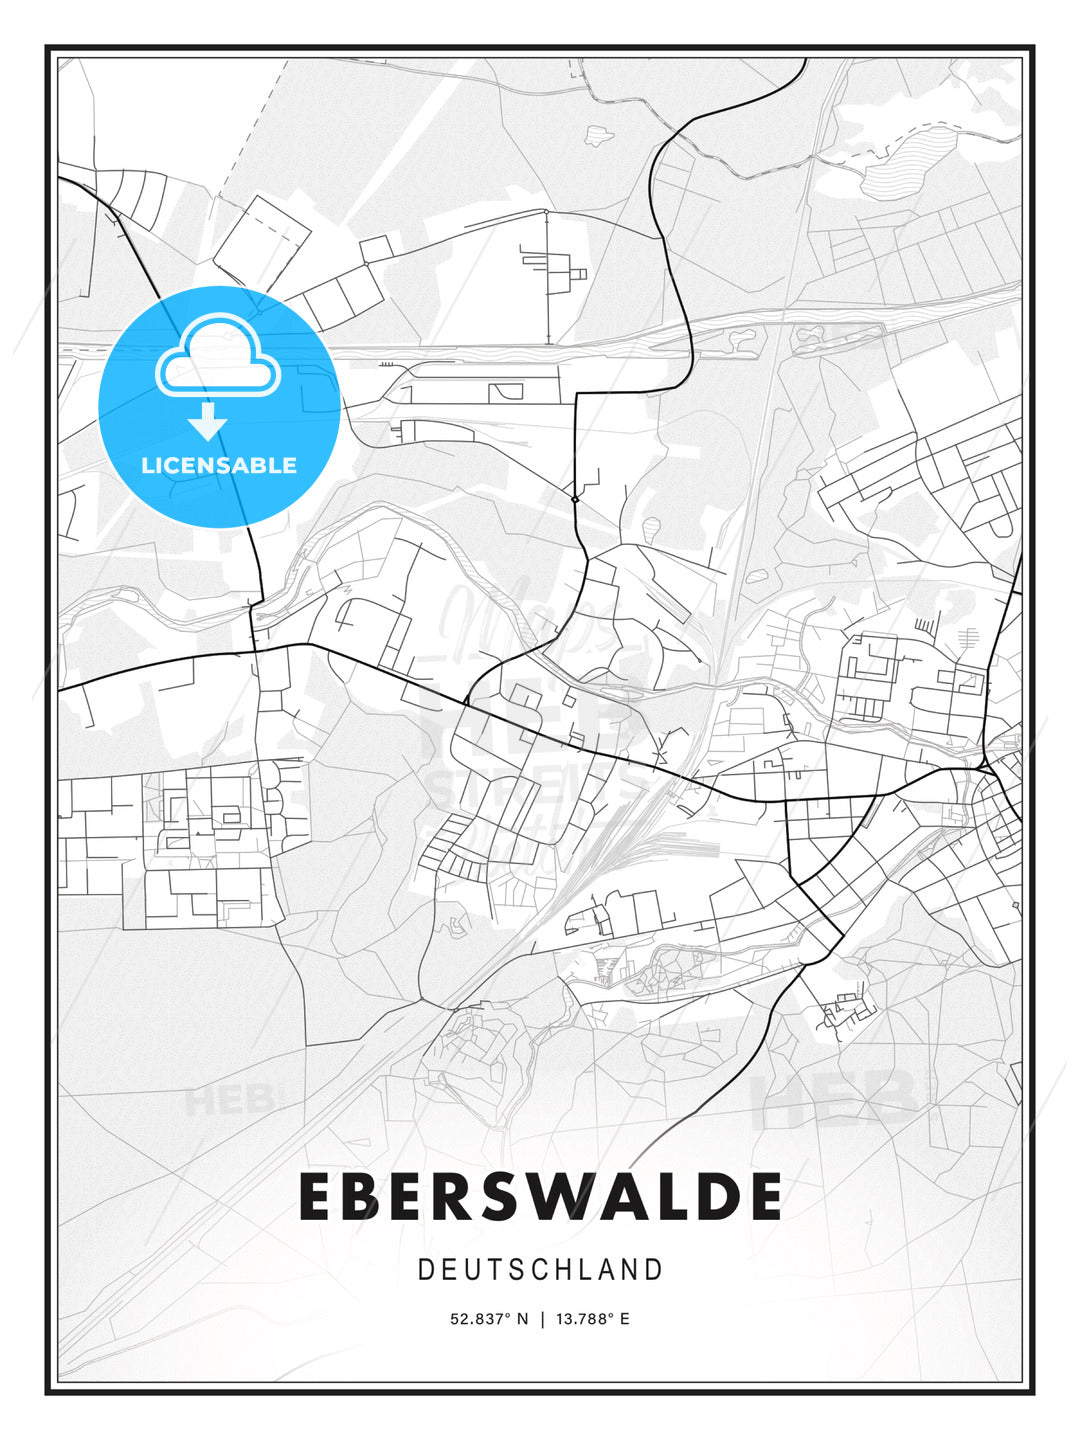 Eberswalde, Germany, Modern Print Template in Various Formats - HEBSTREITS Sketches